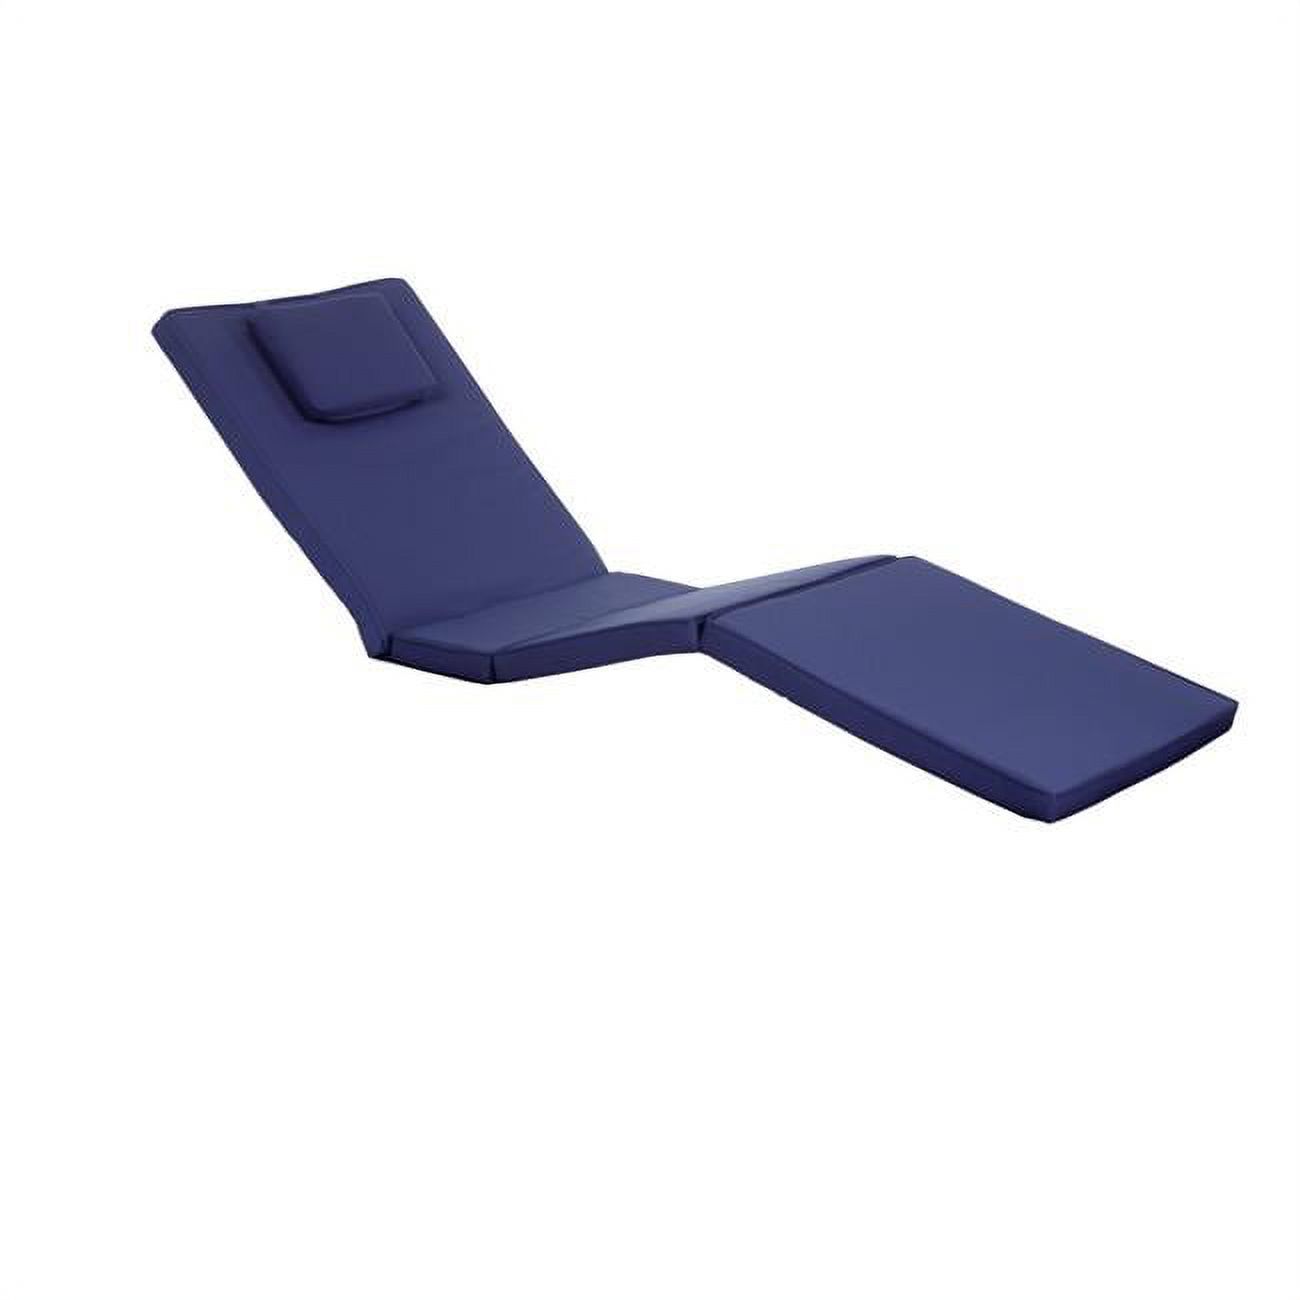 All Things Cedar  Chaise Lounger Cushion - Blue - image 1 of 3